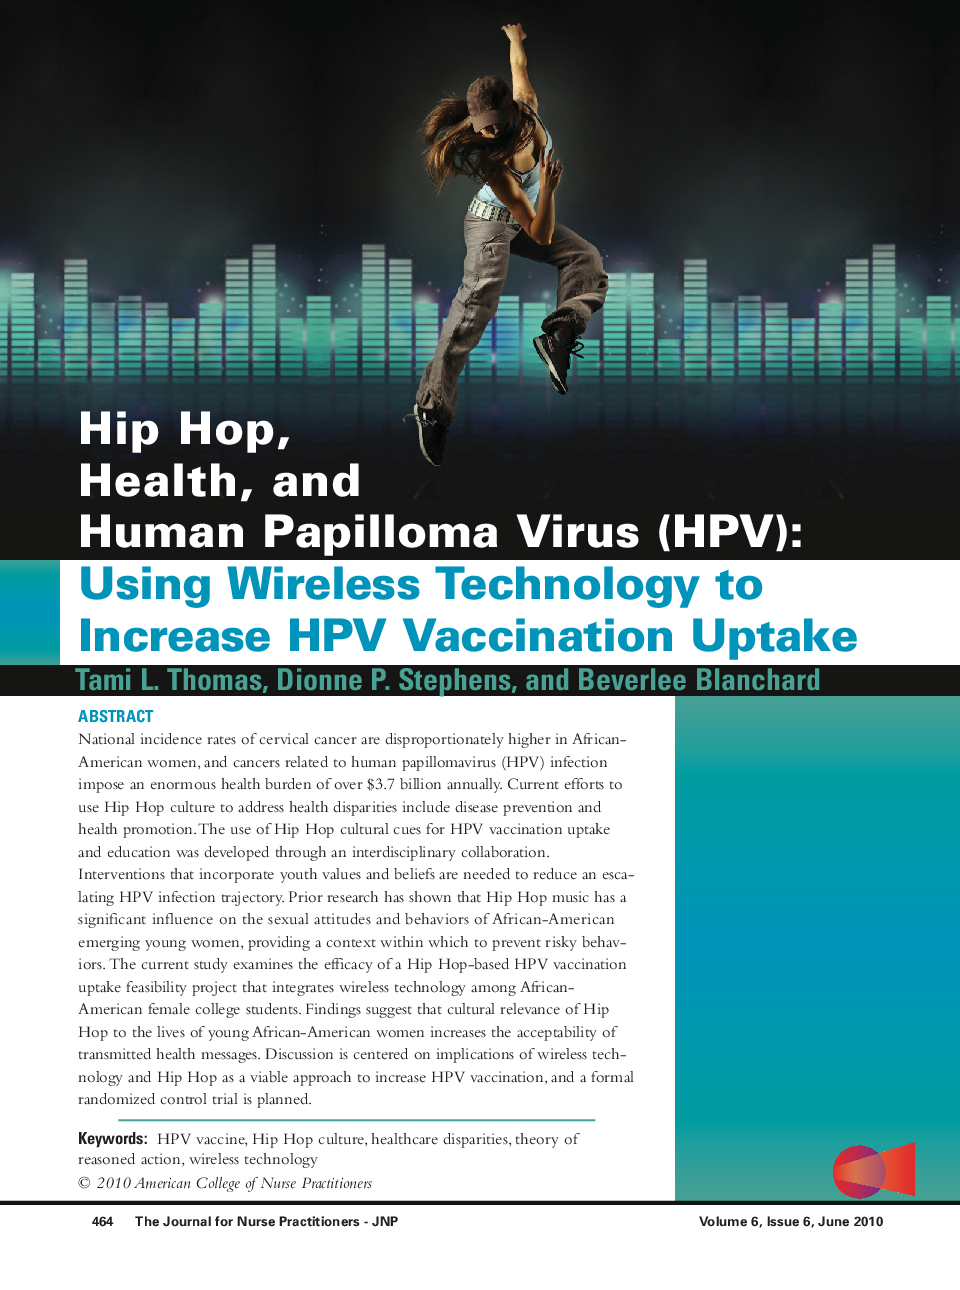 Hip Hop, Health, and Human Papilloma Virus (HPV): Using Wireless Technology to Increase HPV Vaccination Uptake 